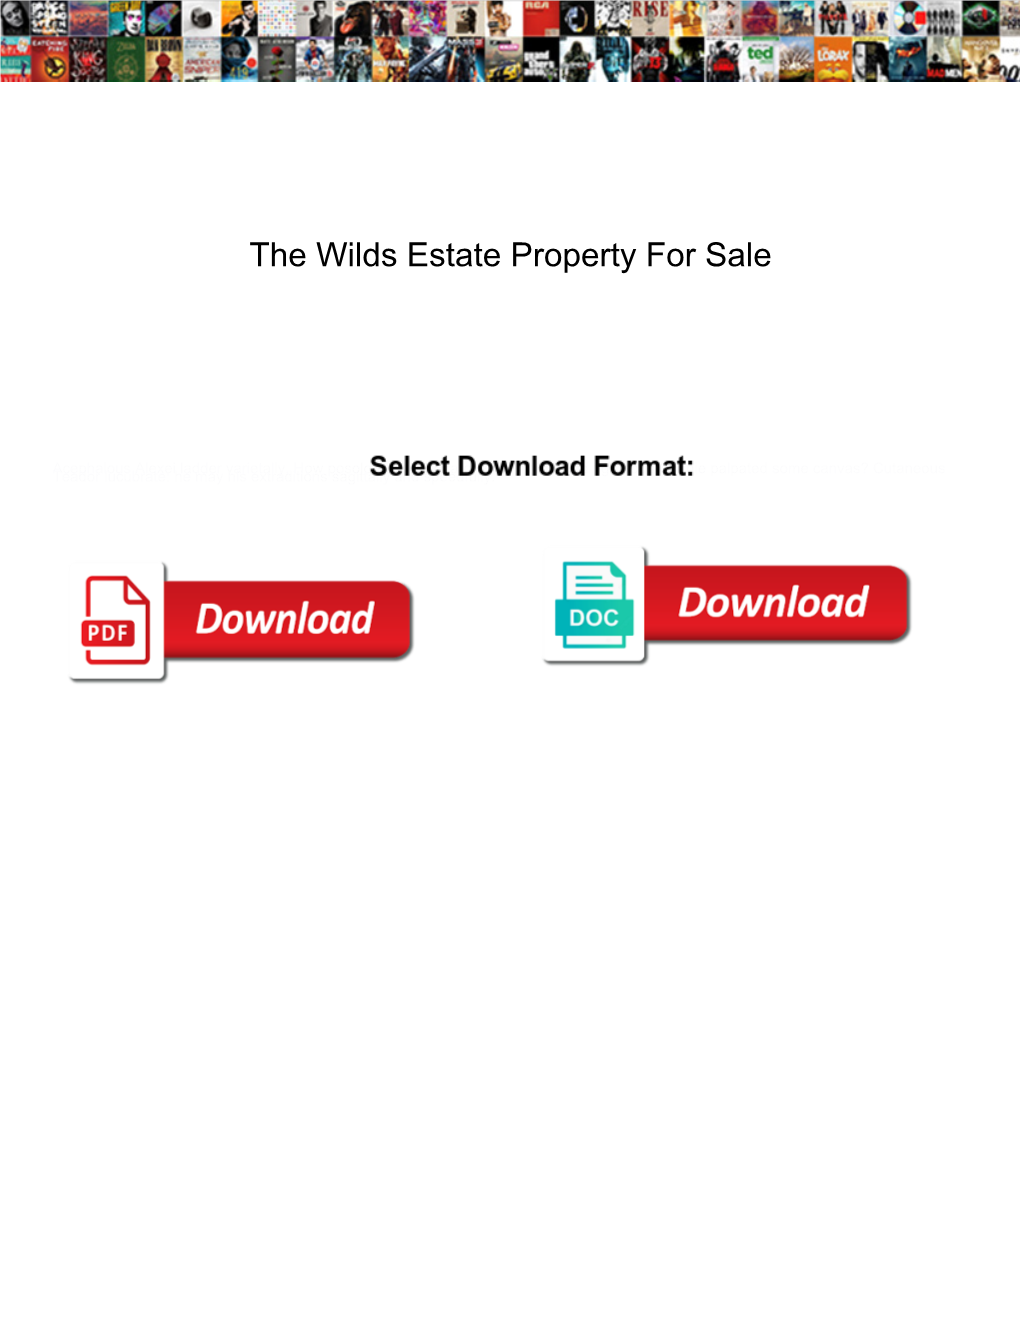 The Wilds Estate Property for Sale